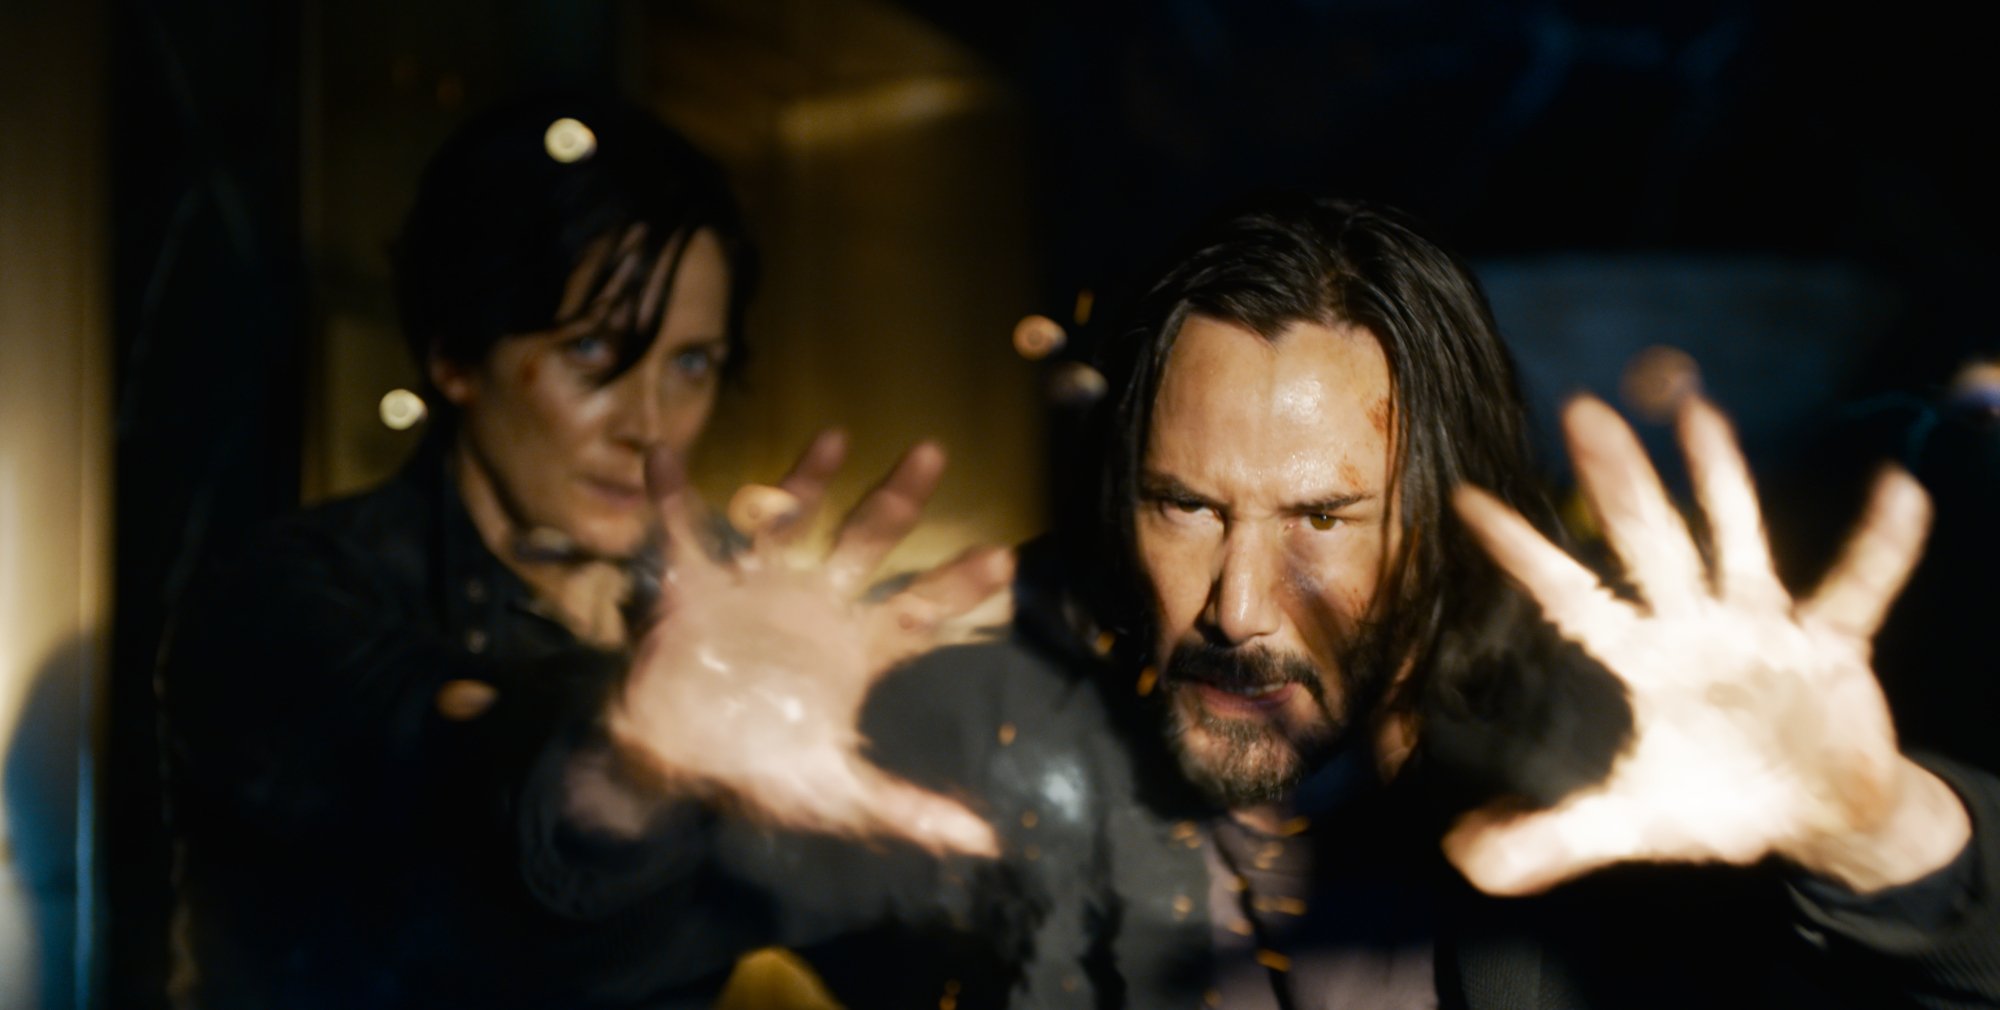 'The Matrix' franchise sequel 'The Matrix Resurrections' actors Carrie-Anne Moss as Trinity and Keanu Reeves as Neo with his hands up